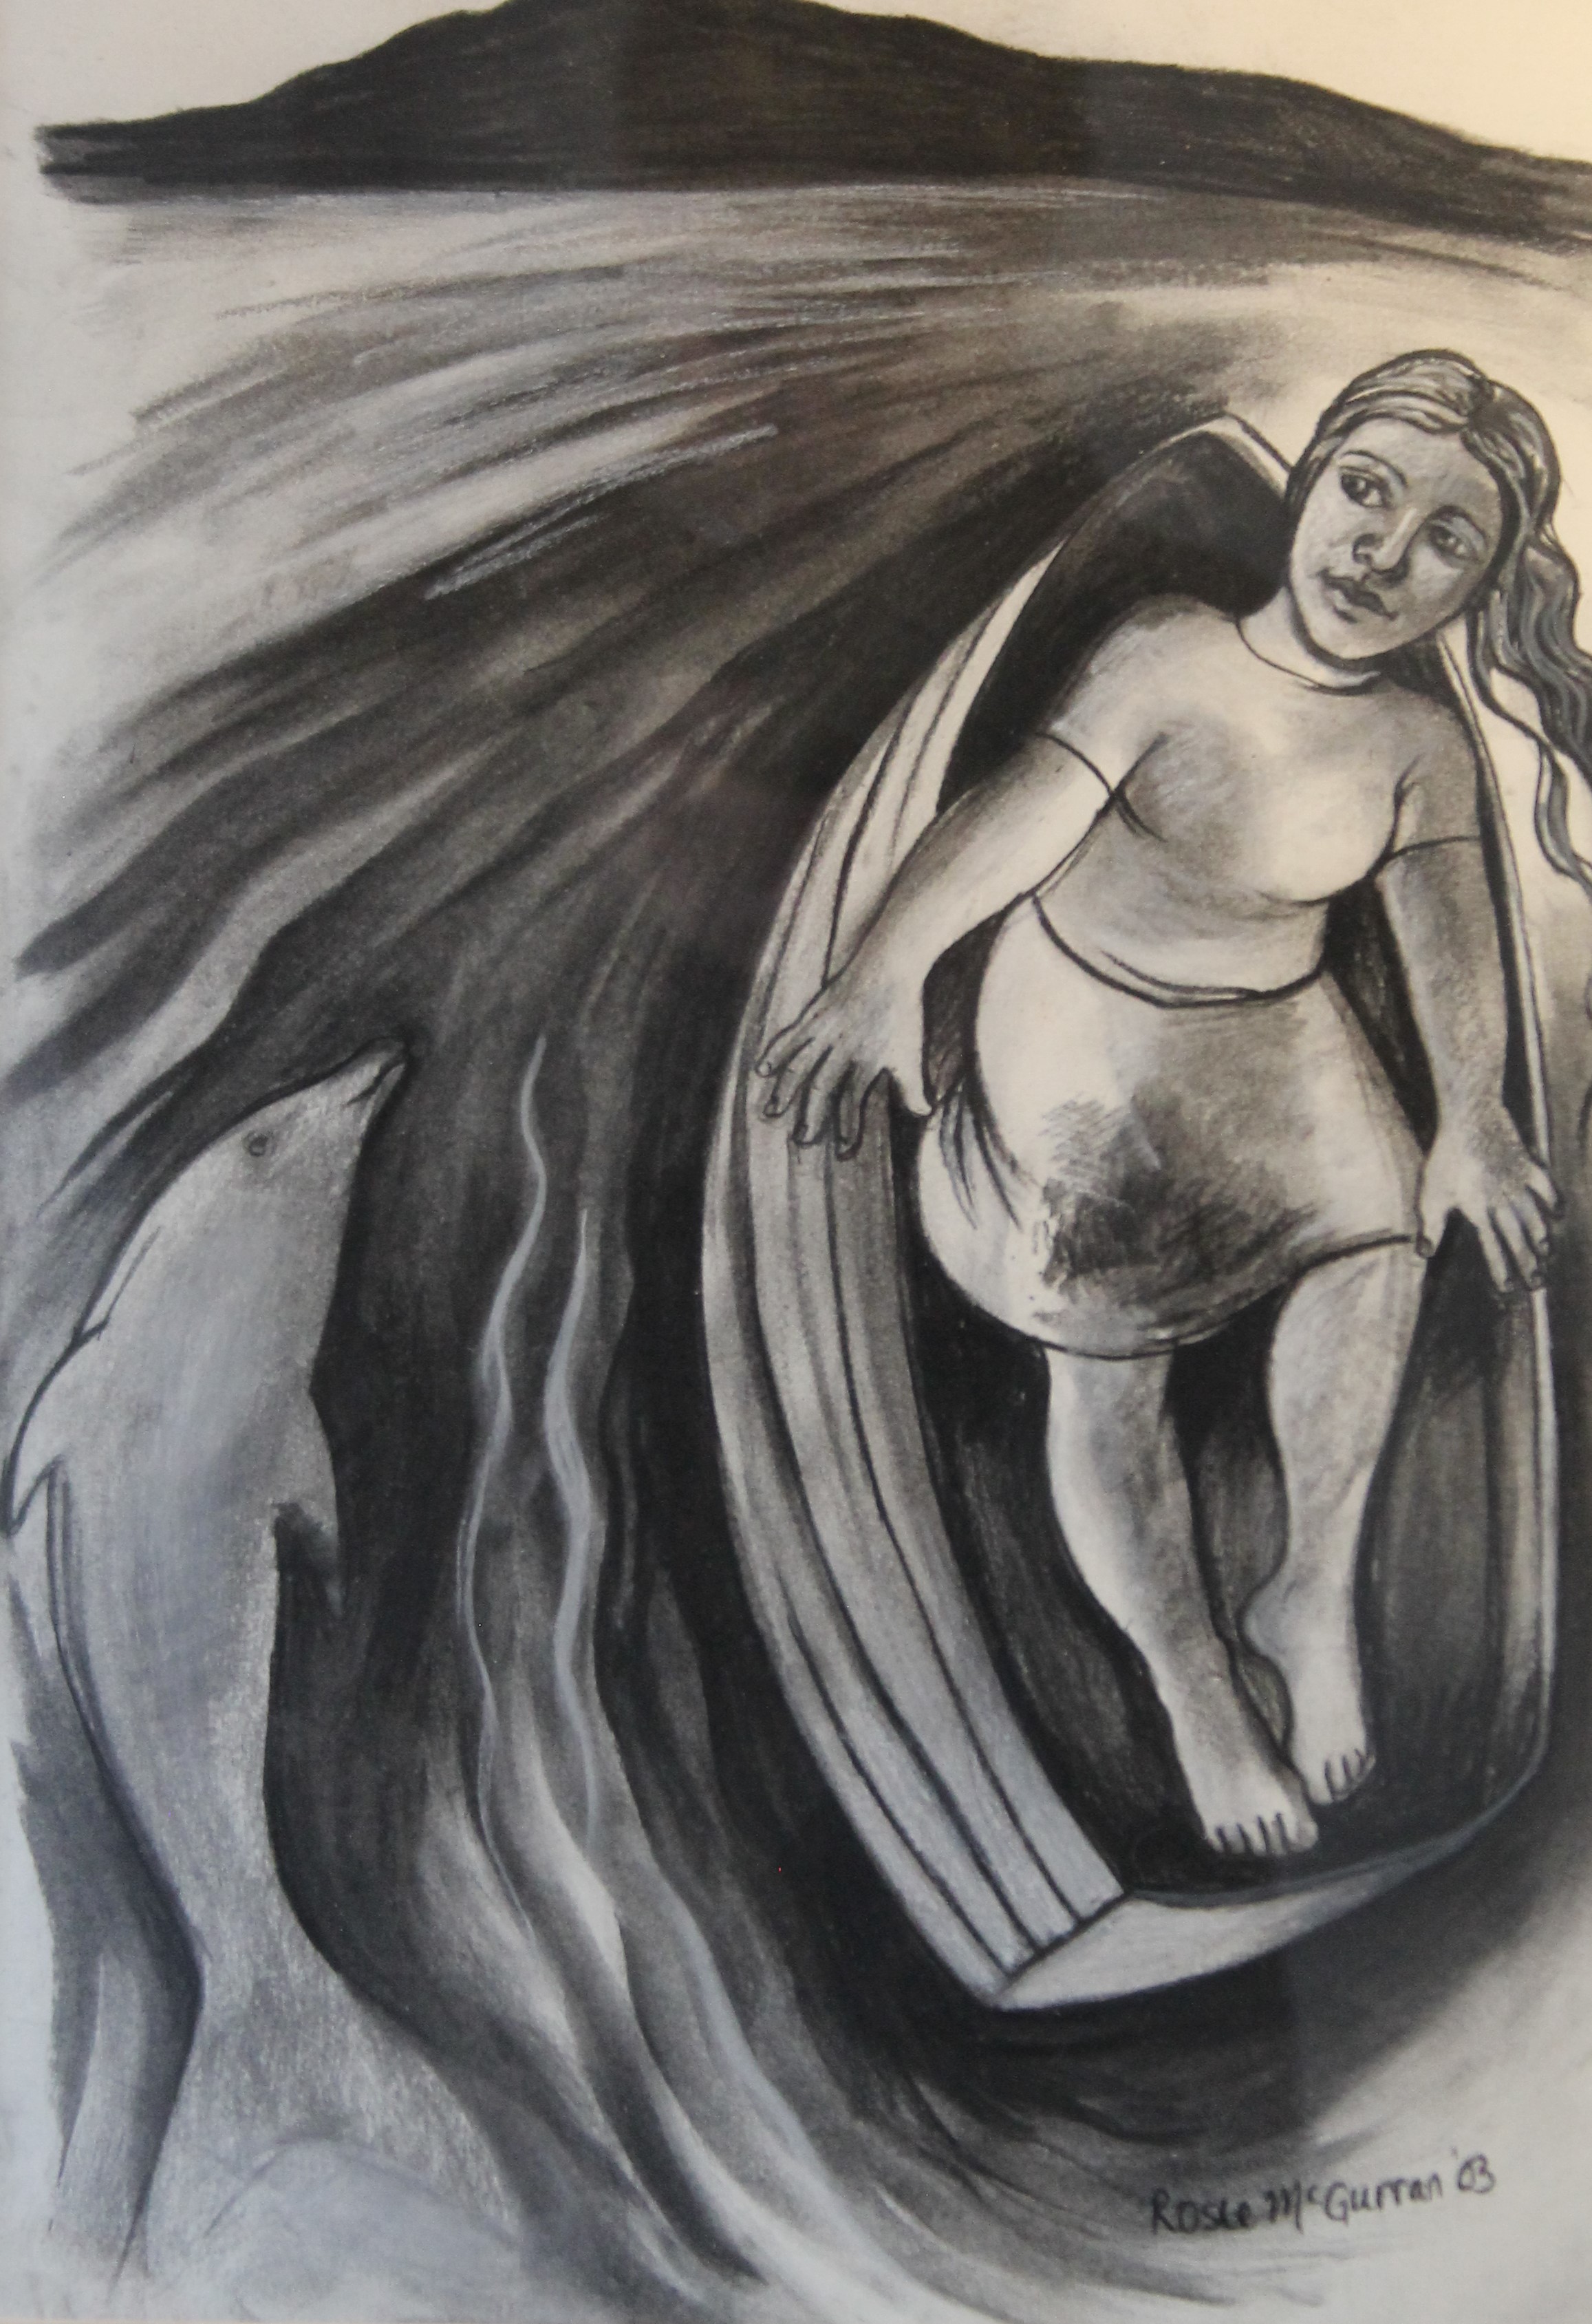 ROSE MCGURRAN (20th/21st century), On the Way to Mac Paras, charcoal, framed and glazed. 29 x 40.